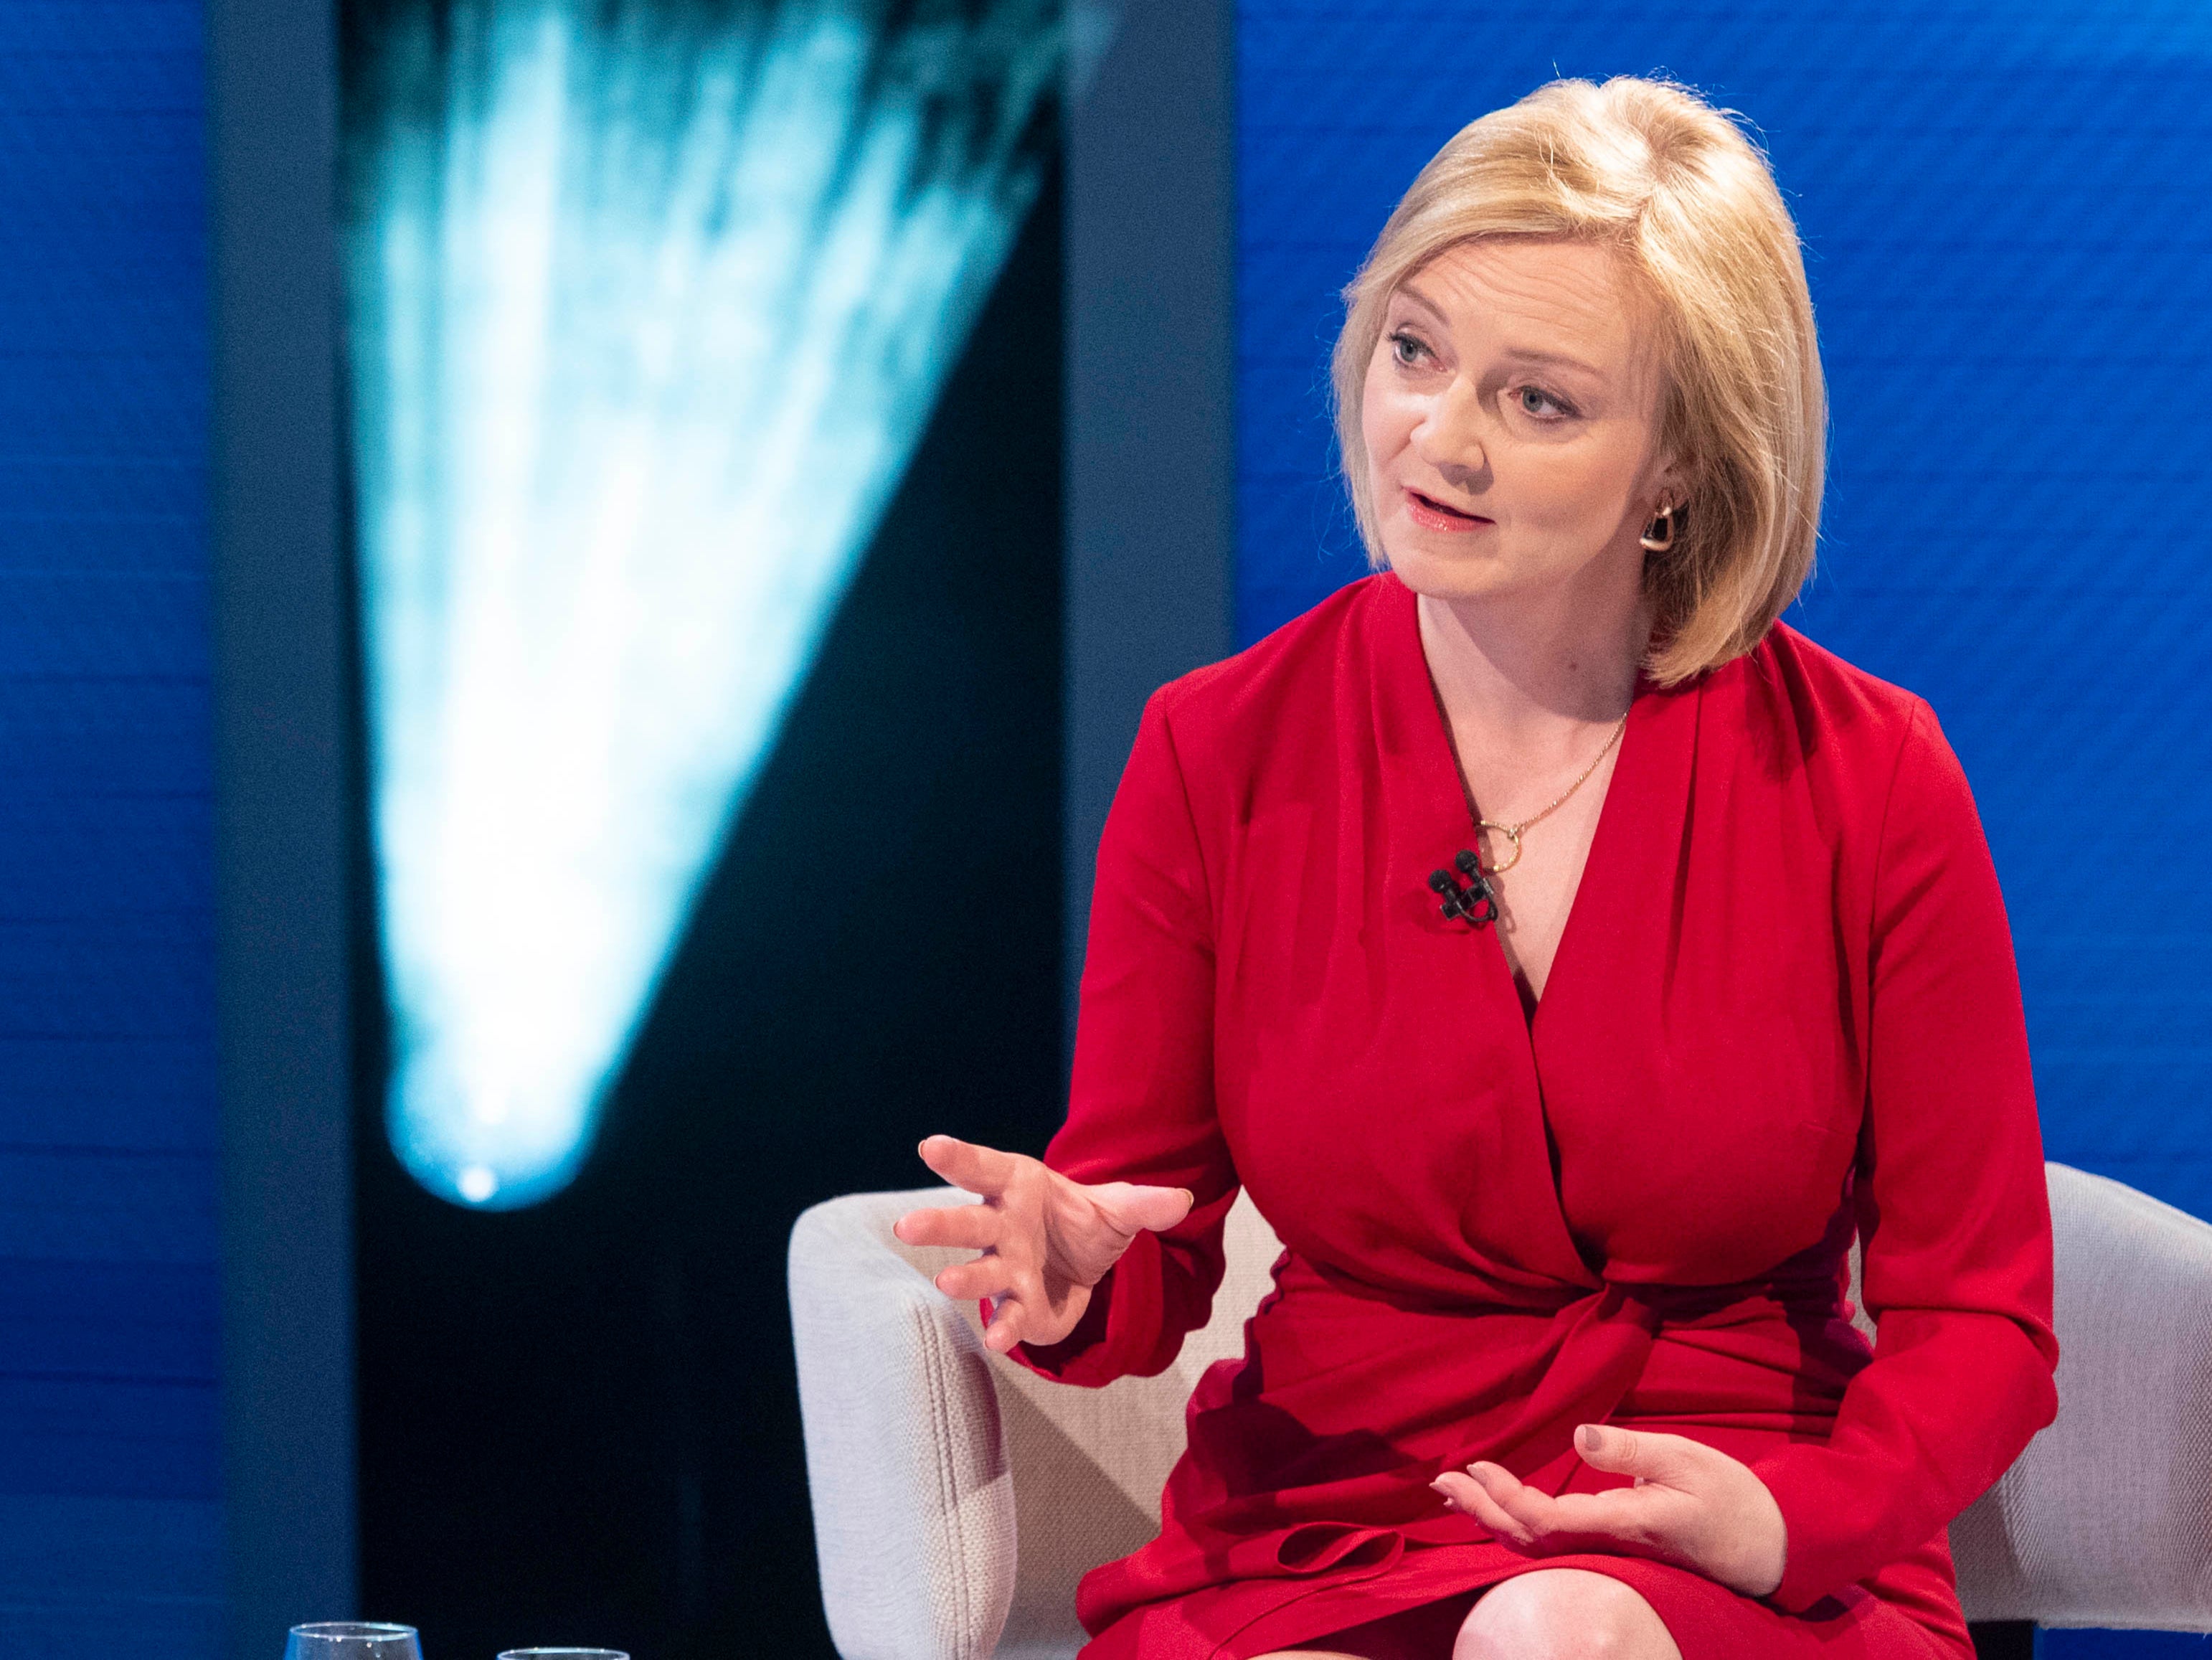 Liz Truss wants to avoid TV interviews in which she might be exposed